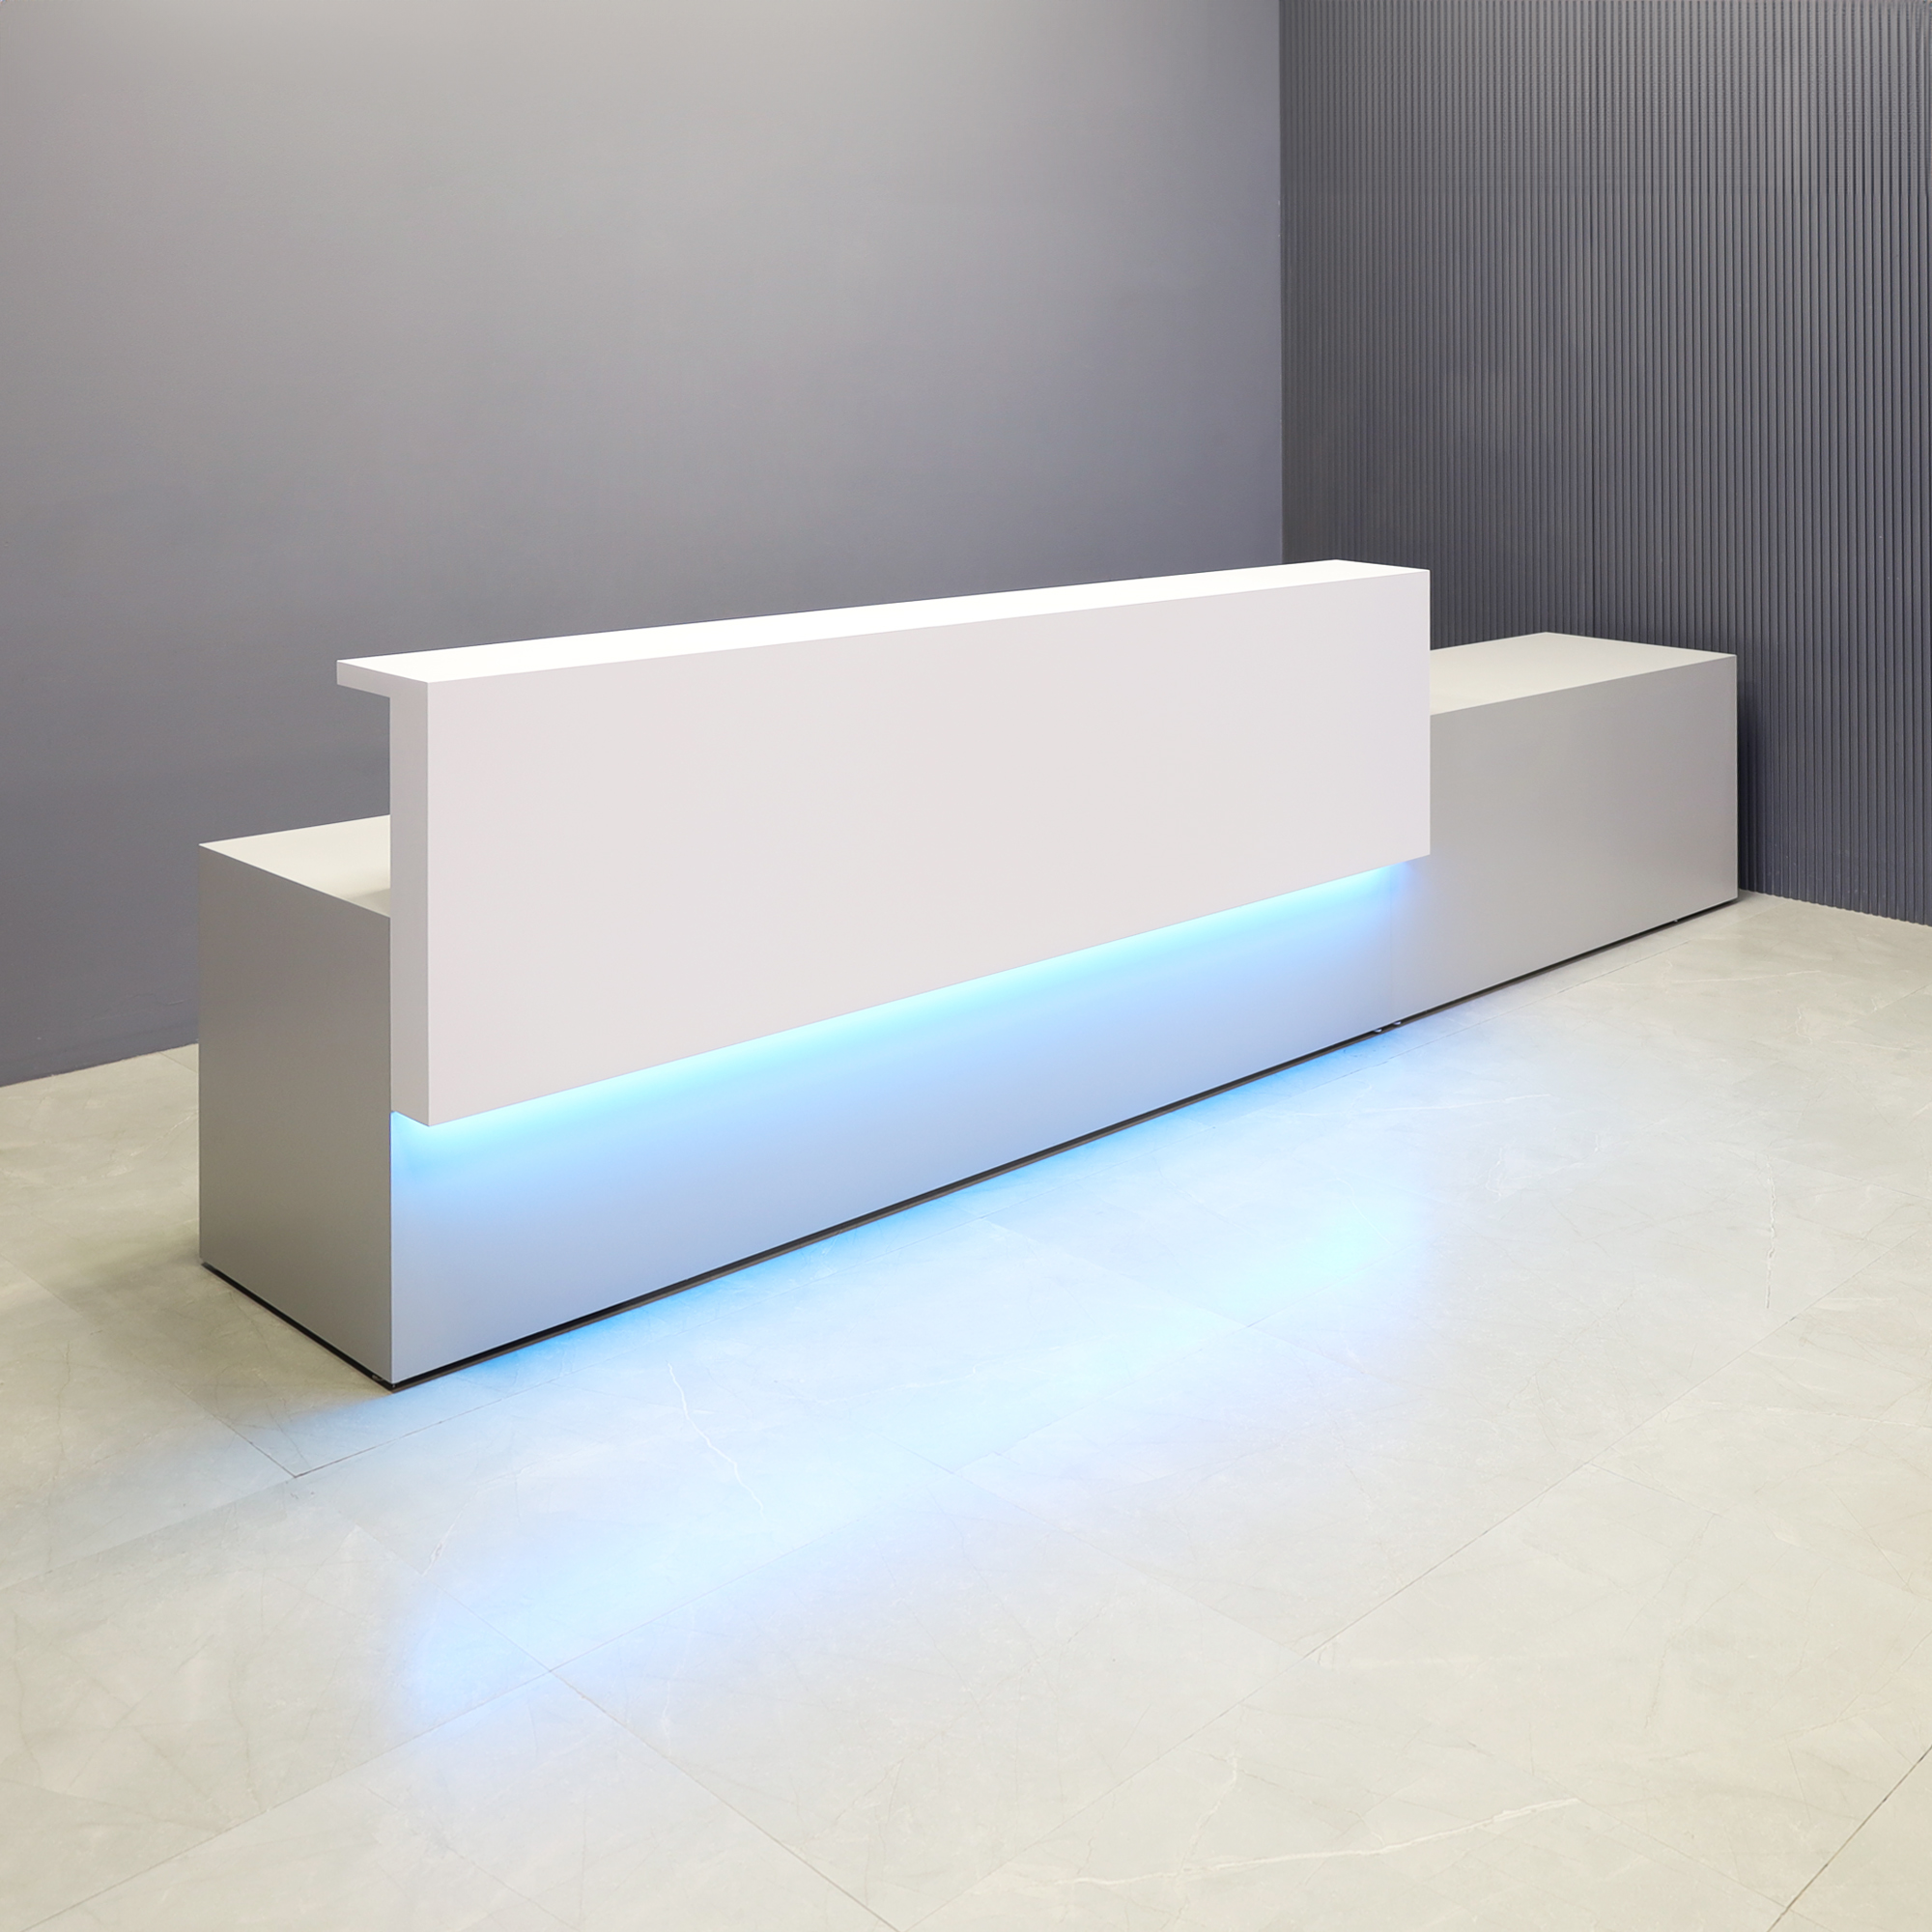 Los Angeles Long and ADA Compliant Custom Reception Desk in white matte laminate counter, folkstone gray desk, with color LED shown here.